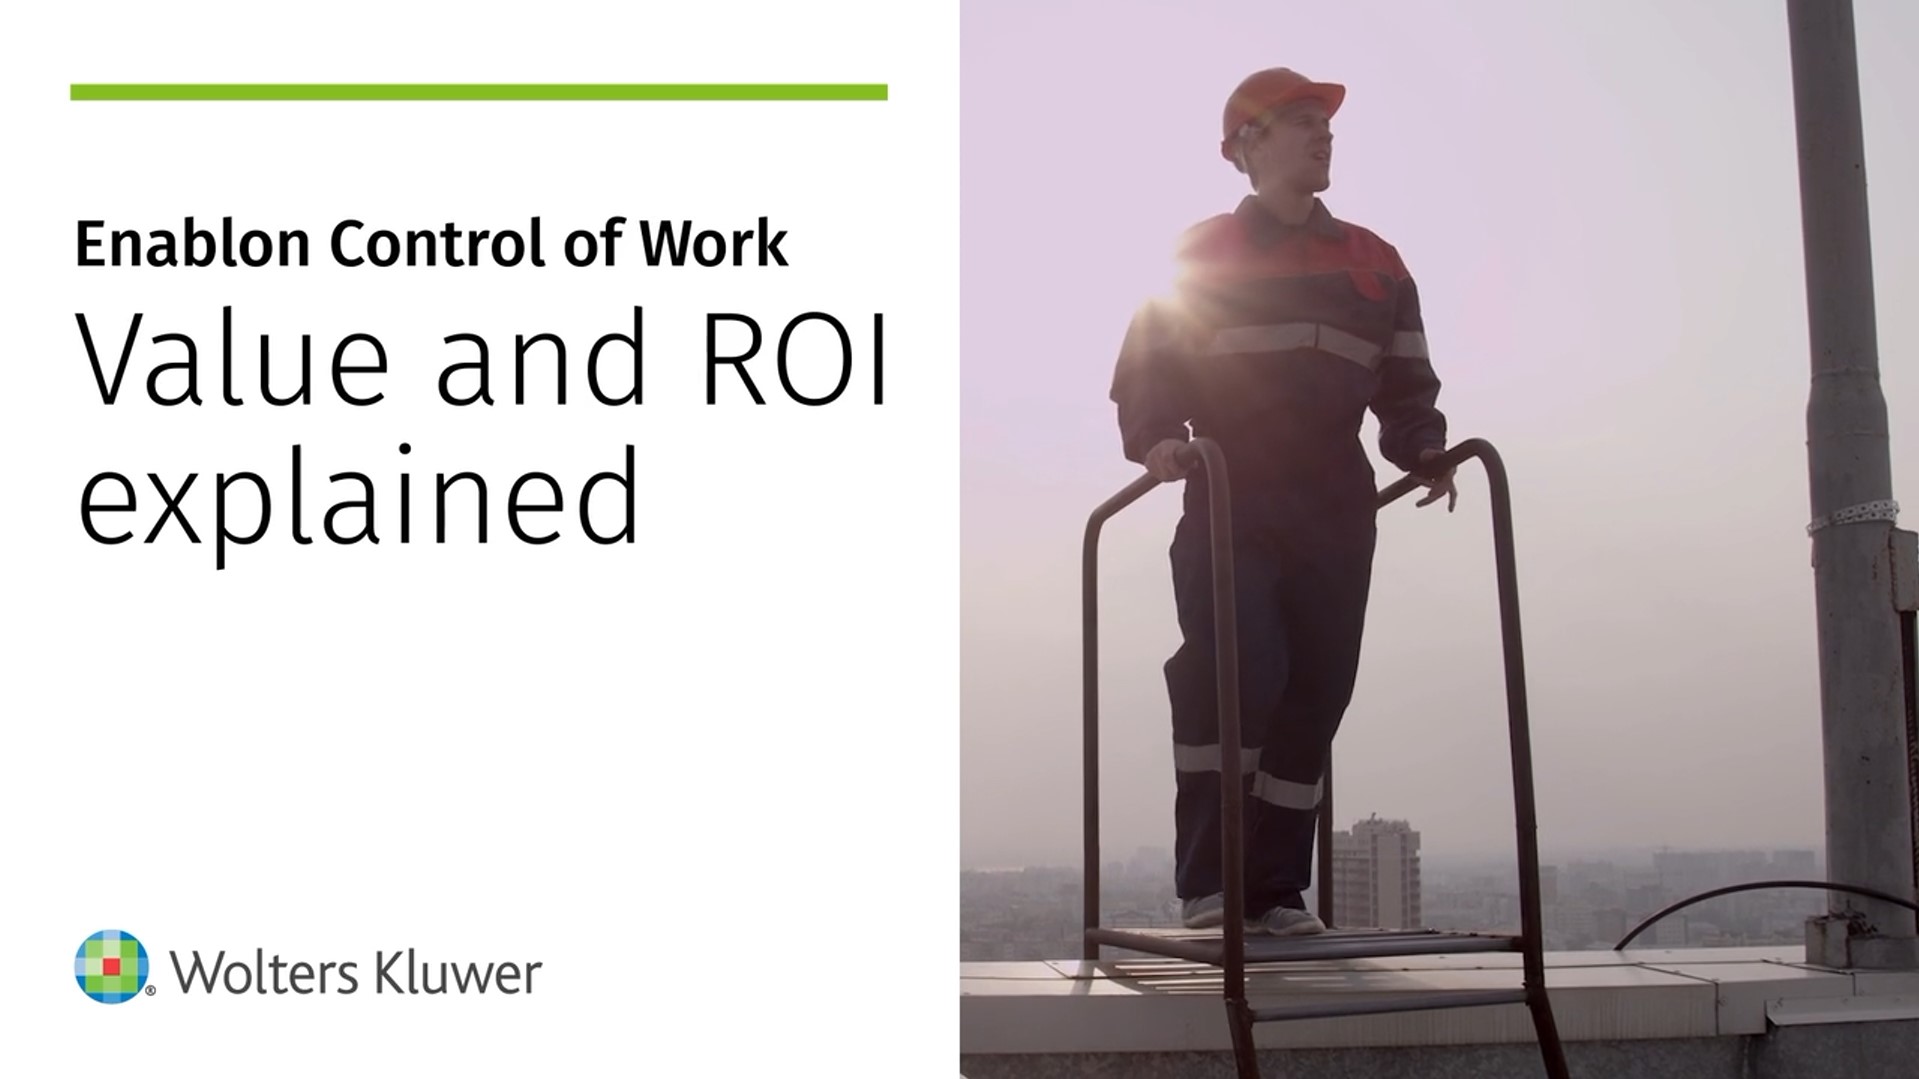 Enablon Control of Work - Value and ROI Explained